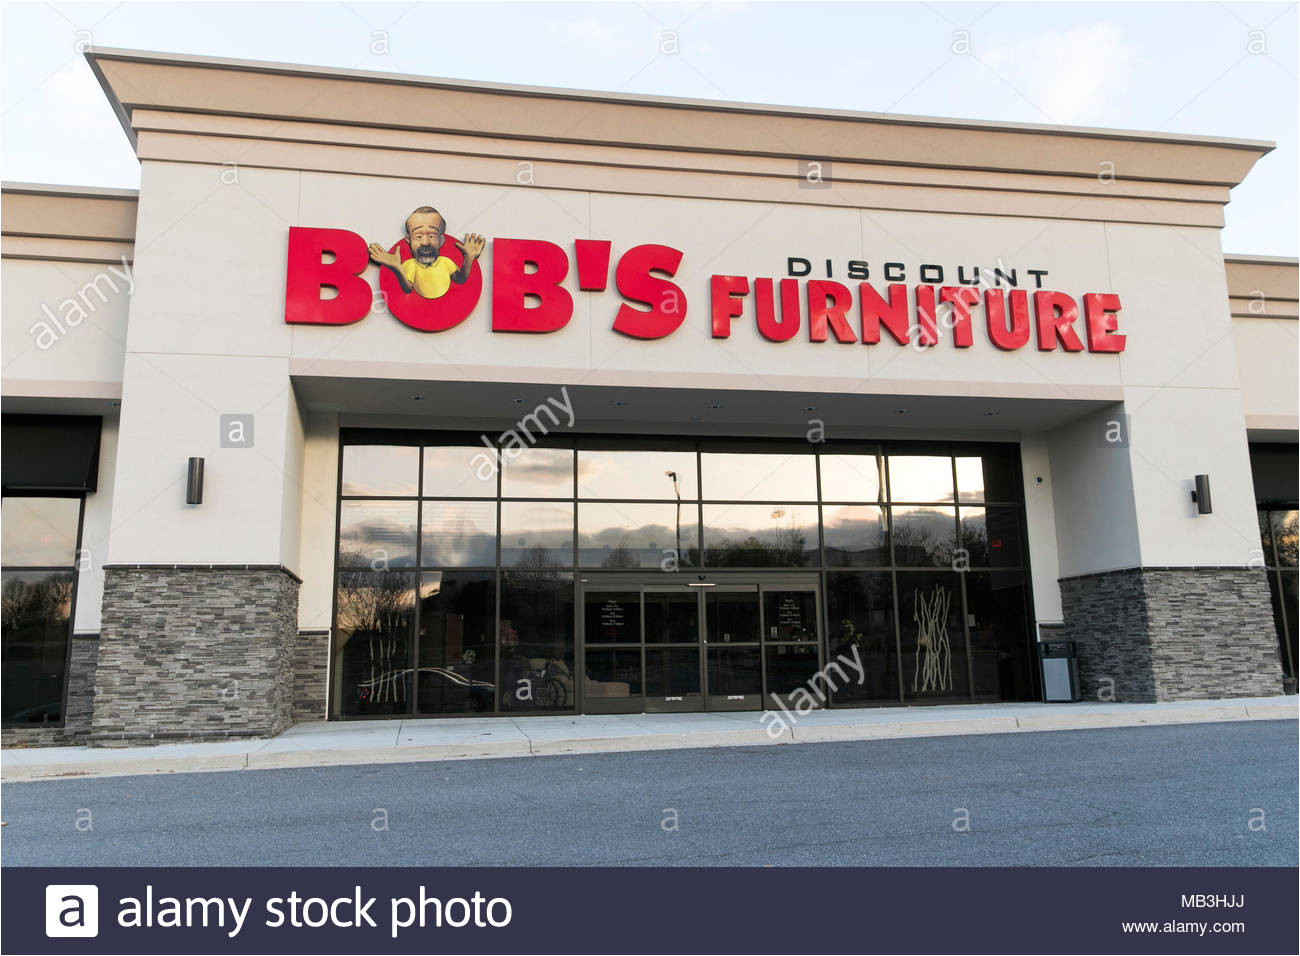 a bob s discount furniture logo seen on a retail store front in hagerstown maryland on